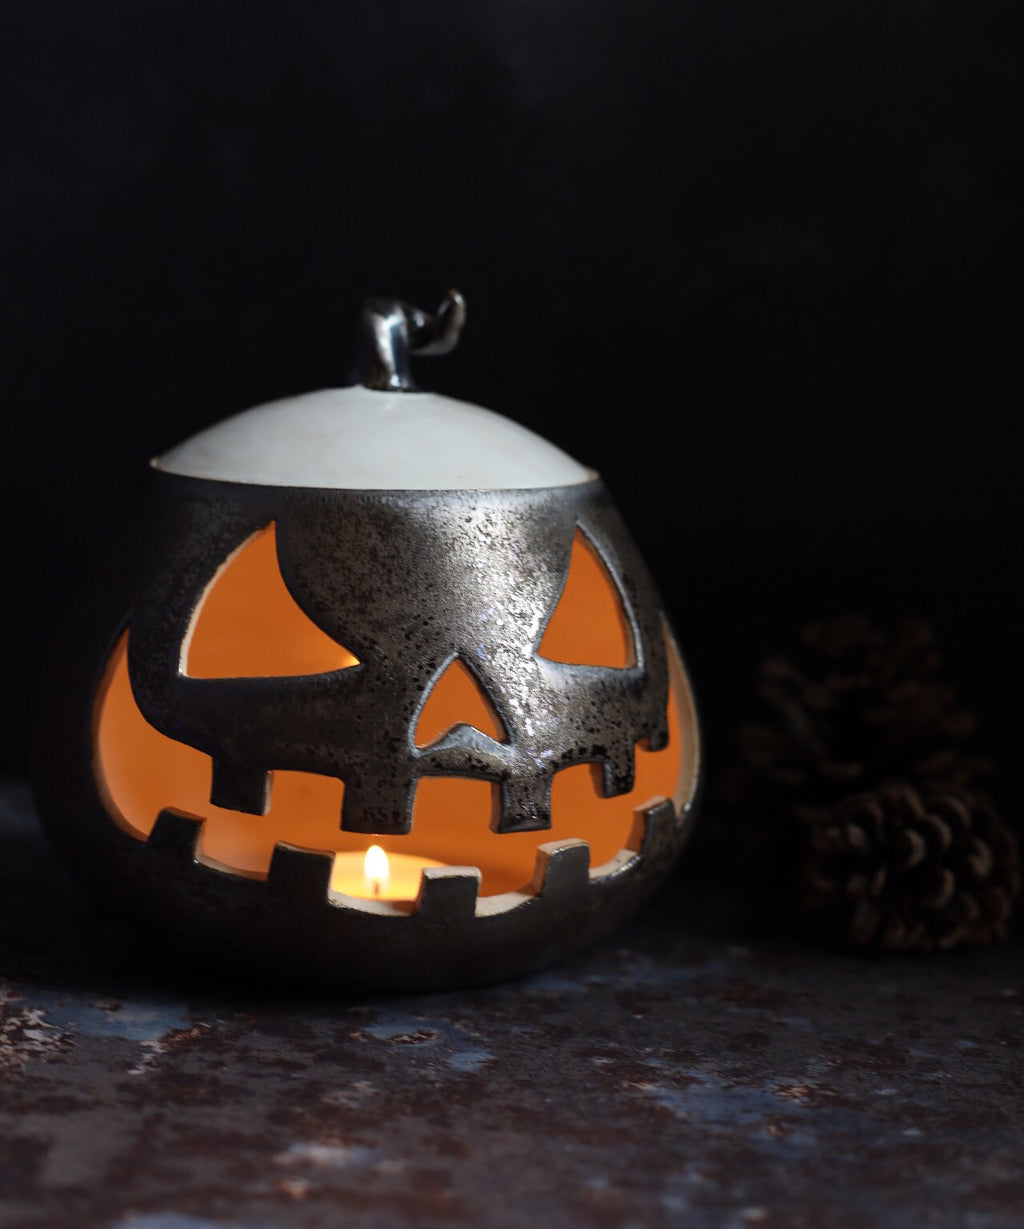 A glazed ceramic lantern pot with a Jack ‘o Lantern design from Glosters pottery classes.